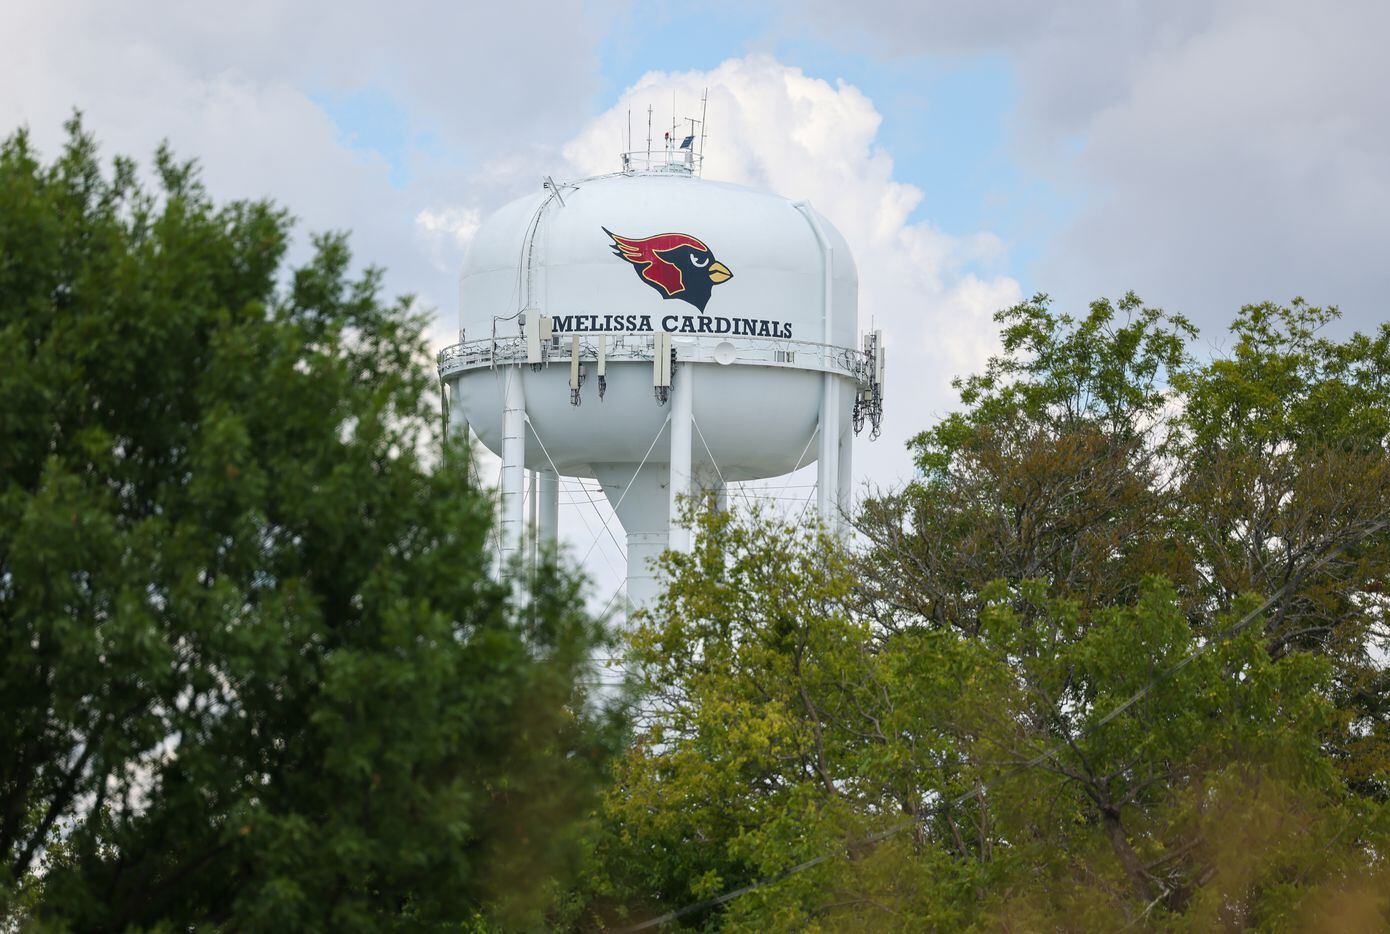 A water tower for the city of Melissa sports a Melissa Cardinals logo.